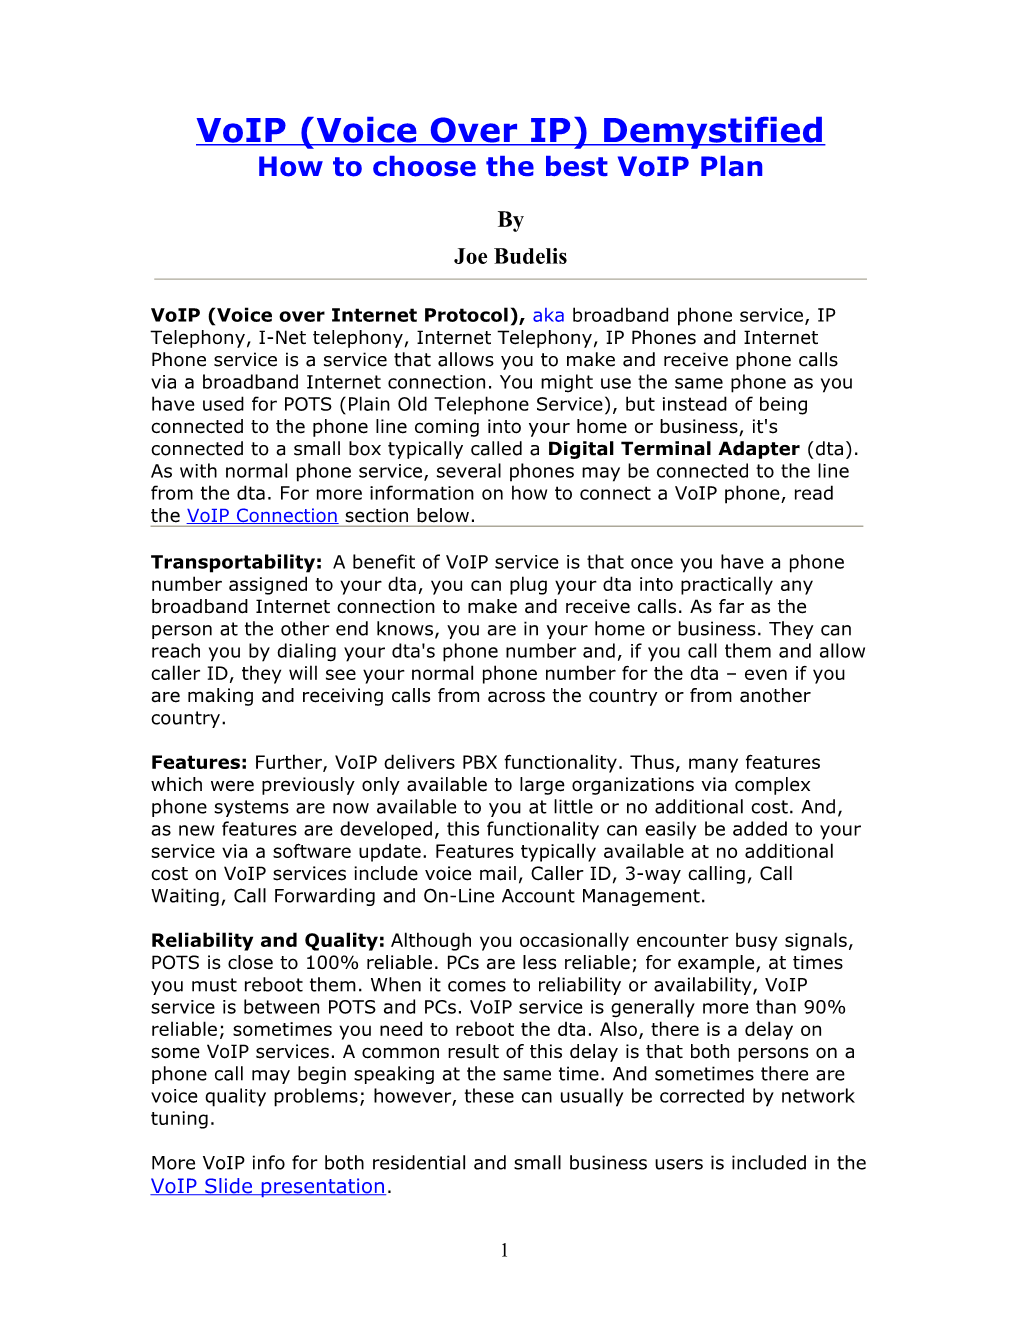 Voip for Dummies